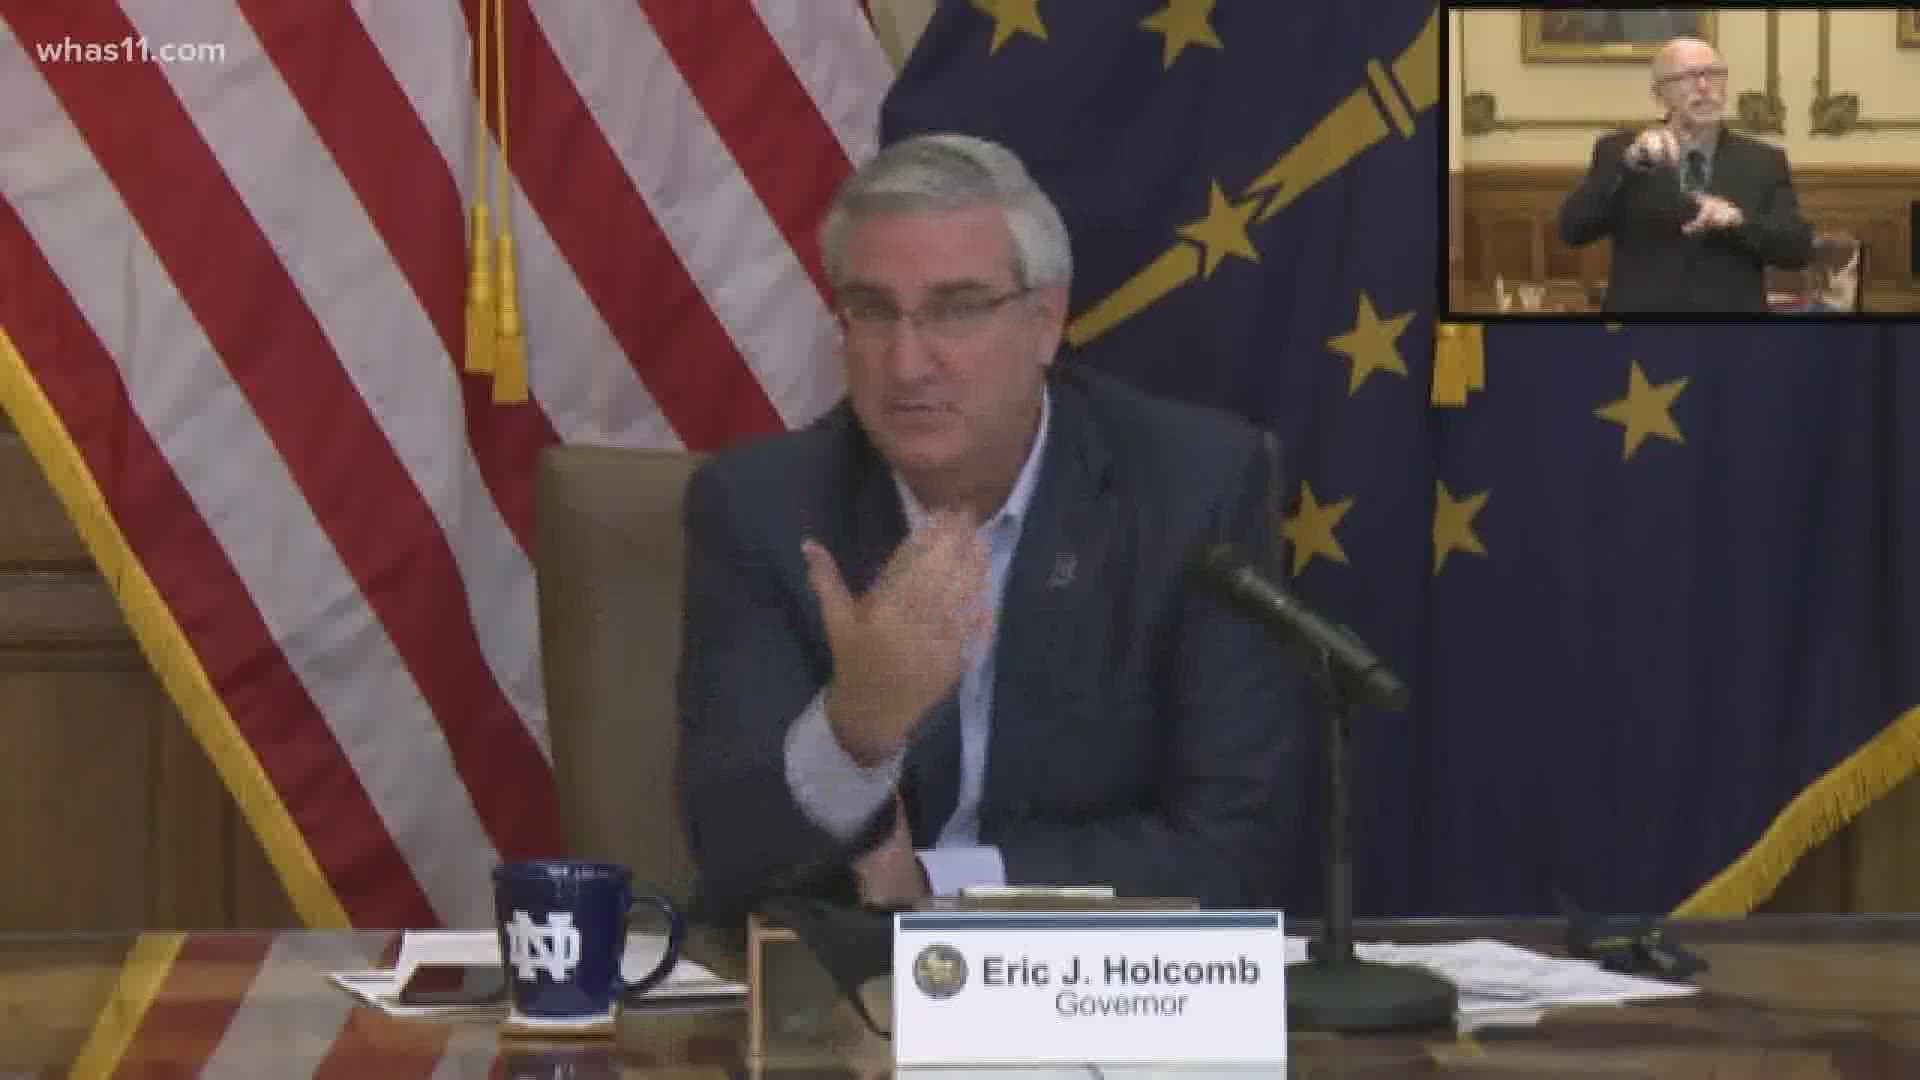 While Indiana was set to enter Stage 5 of its reopening plan Friday, Gov. Eric Holcomb announced a temporary pause on some changes as the state sees more cases.